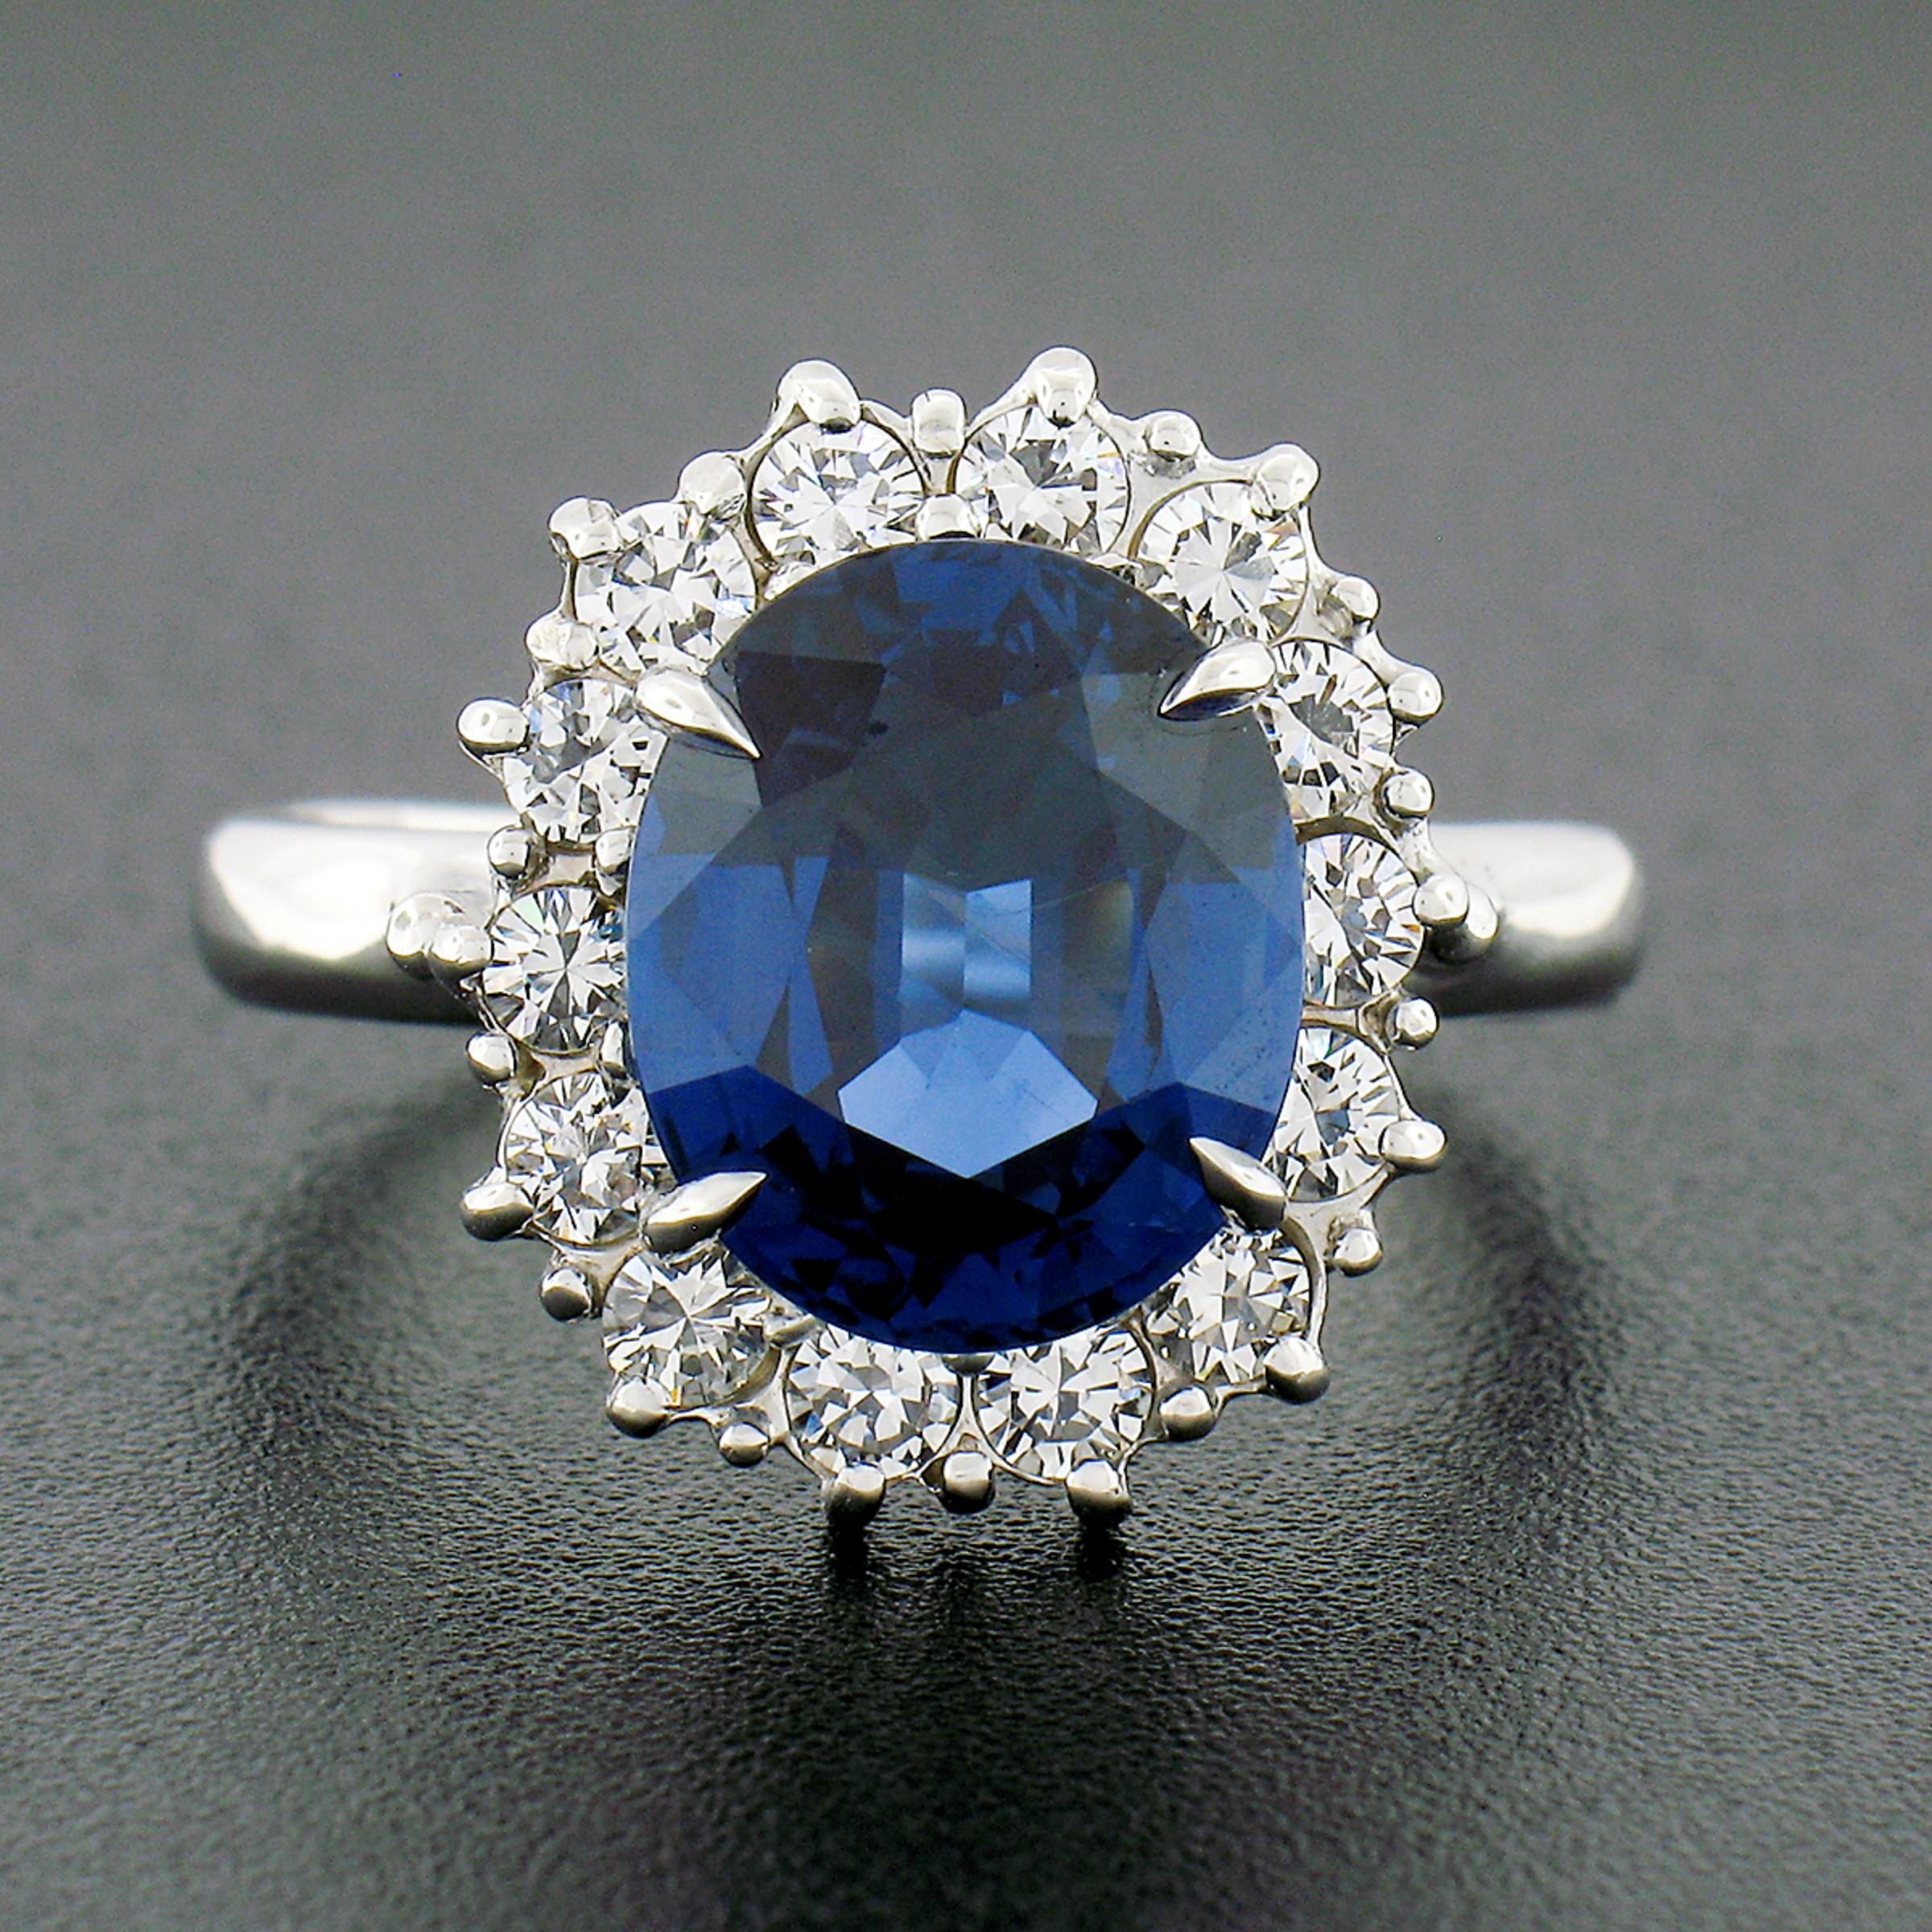 This absolutely stunning vintage ring is crafted from solid 18k white gold and features a magnificent, GIA certified, natural sapphire stone neatly prong set at its center. This large and very clean sapphire is a top shelf stone and has the most